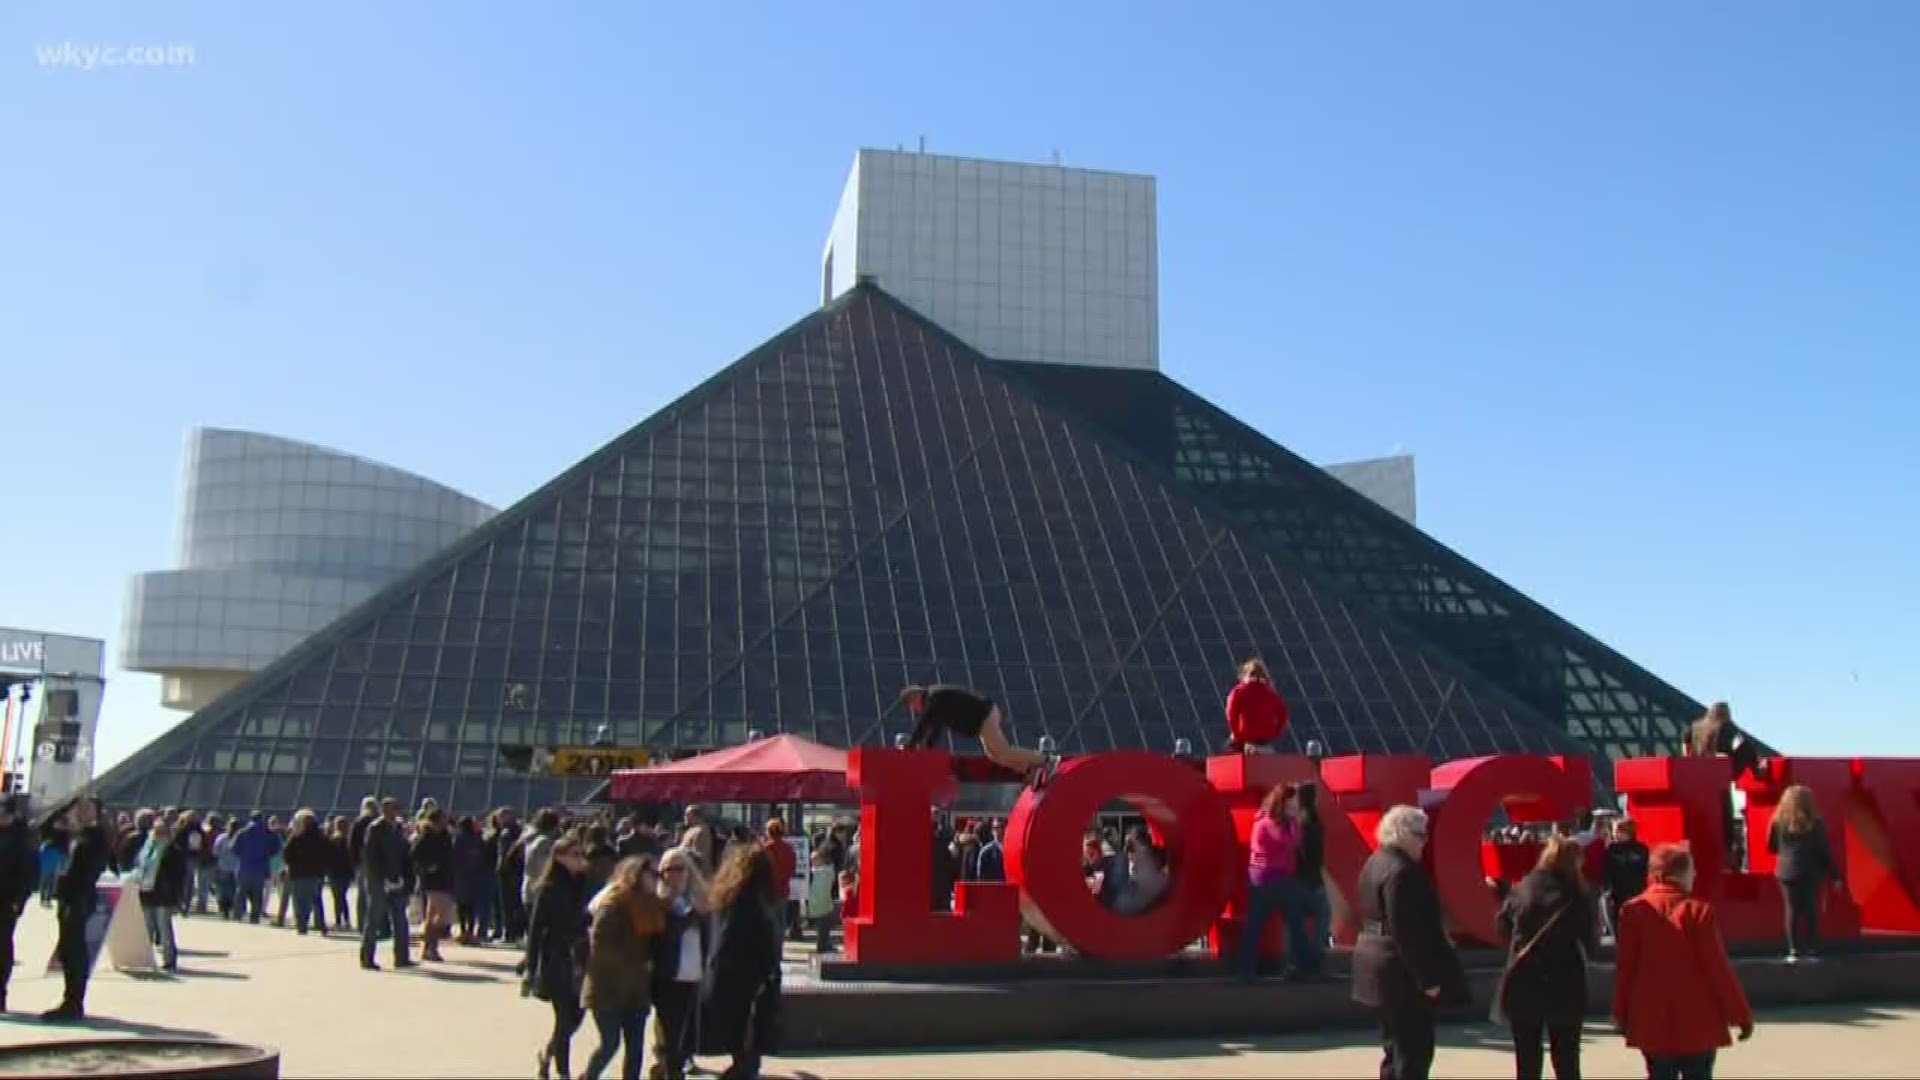 Local architect pays tribute to I.M. Pei, who designed Rock & Roll Hall of Fame